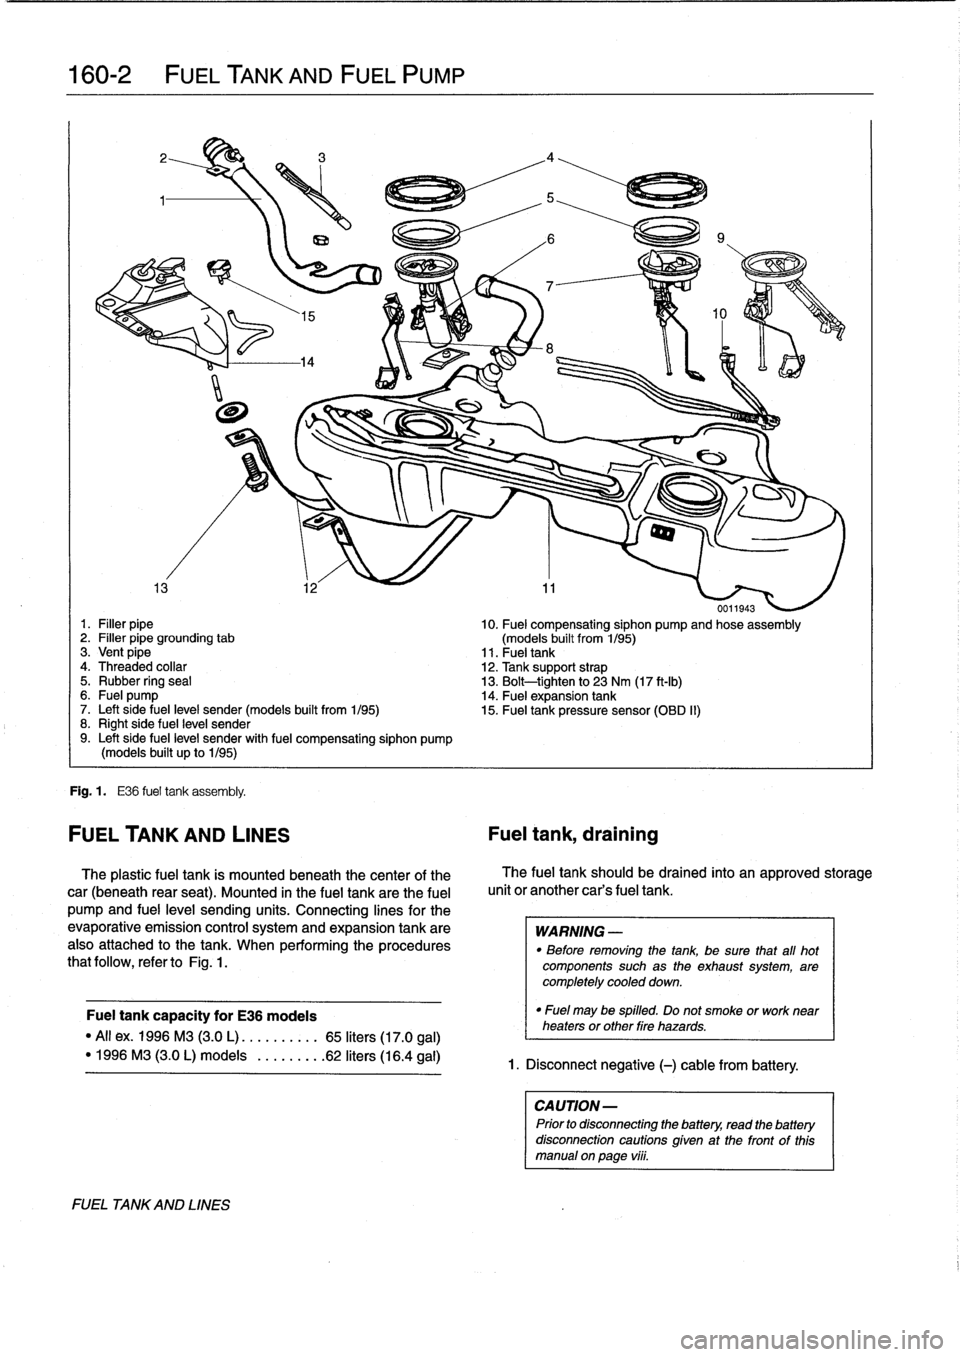 BMW 318i 1997 E36 Workshop Manual 
160-2

	

FUEL
TANK
AND
FUEL
PUMP

0011943
1
.
Filler
pipe

	

10
.
Fuel
compensating
siphon
pump
and
hose
assembly
2
.
Filler
pipe
grounding
tab

	

(models
built
from
1/95)
3
.
Vent
pipe

	

11
.
F